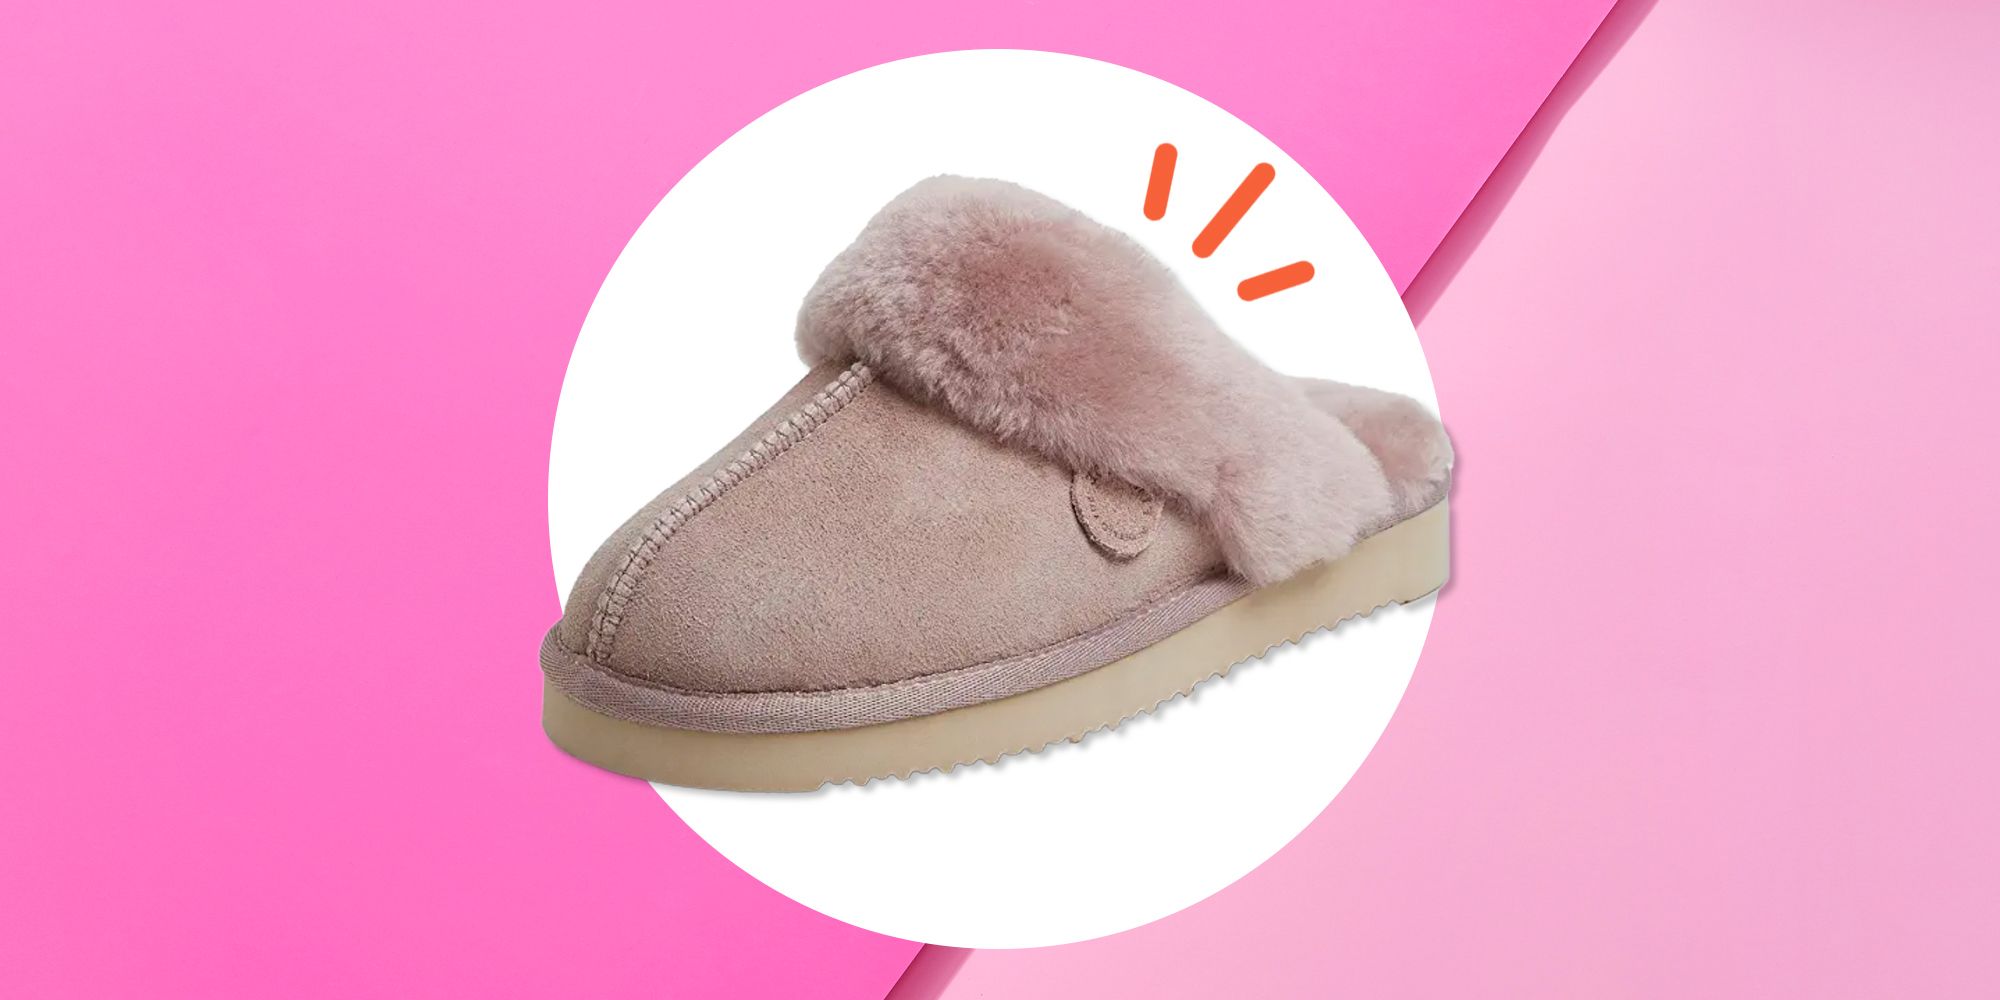 Amazon.com: WaySoft Genuine Australian Sheepskin Women Slippers, 100%  Shearling Hard Bottom Slippers for Women Indoor and Outdoor Warm Fuzzy Wool  Slippers : Clothing, Shoes & Jewelry